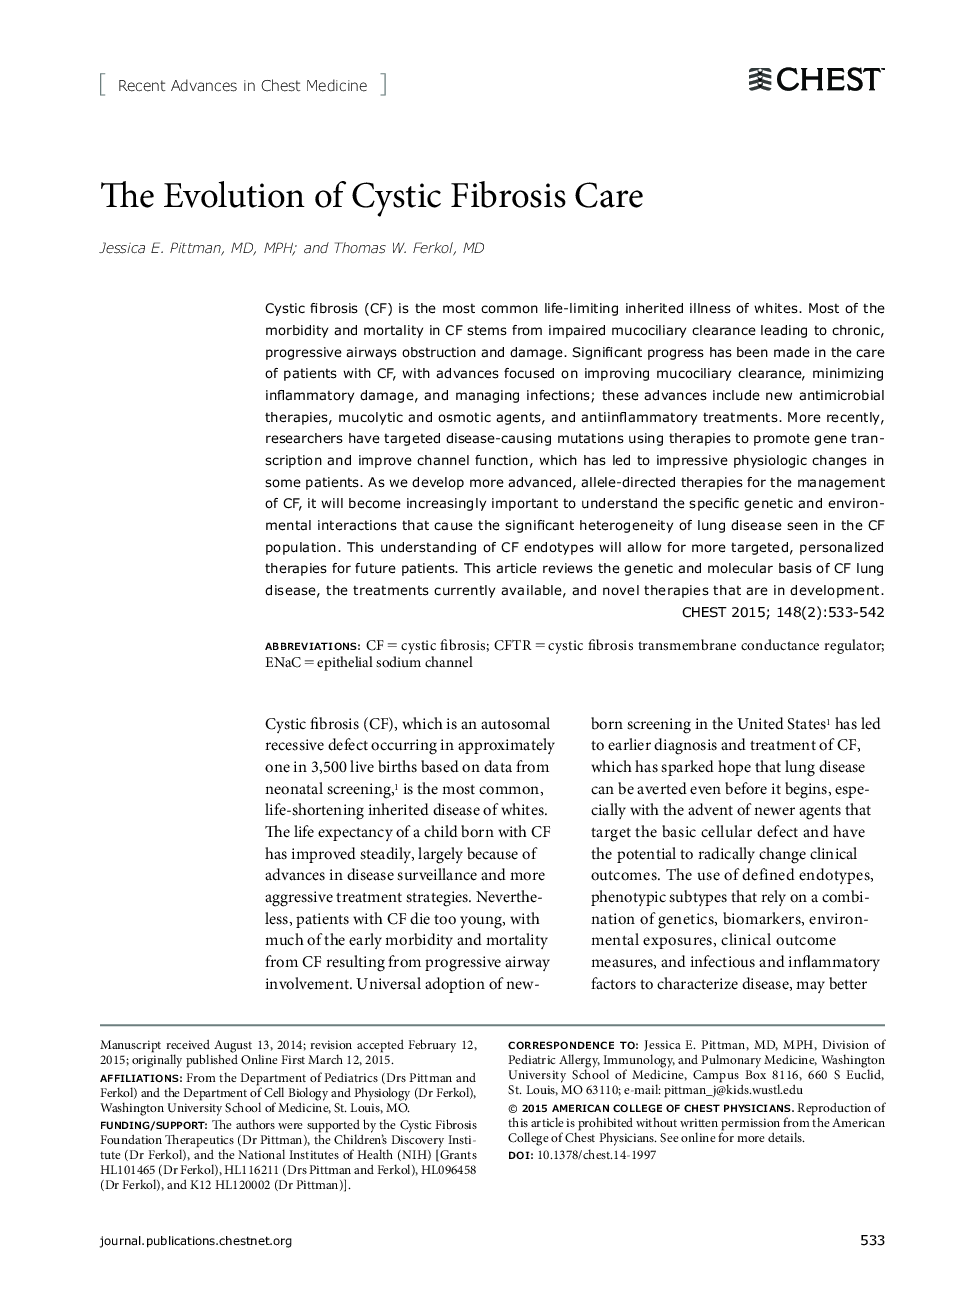 The Evolution of Cystic Fibrosis Care